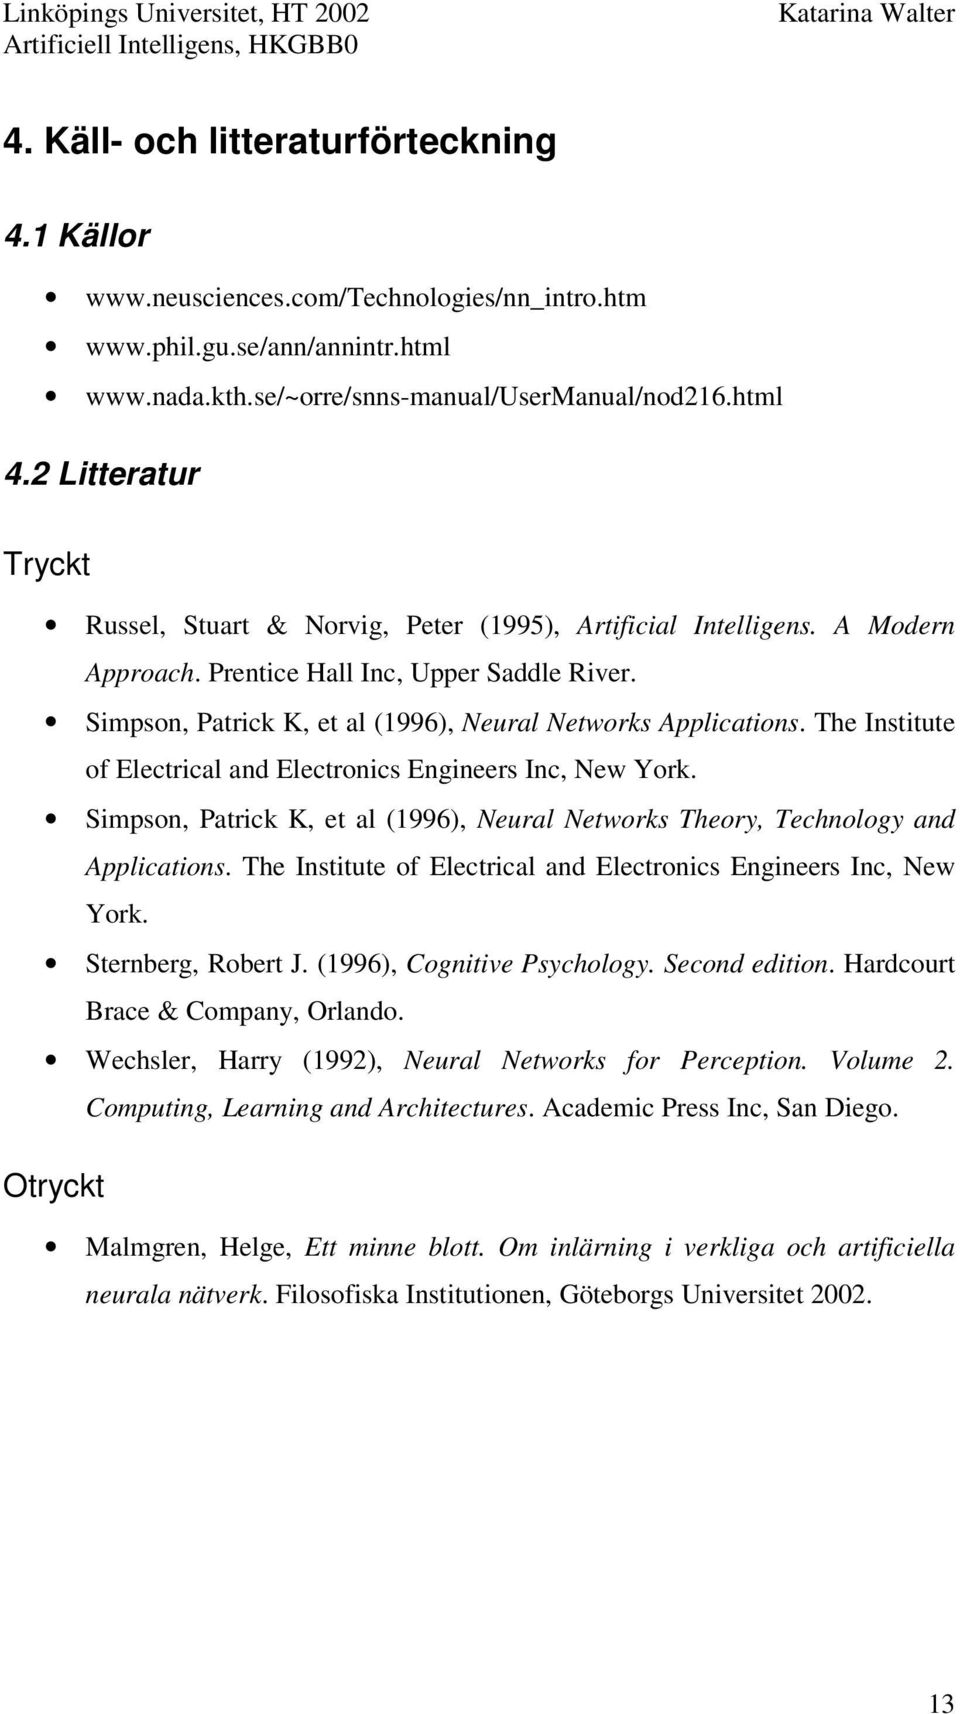 Simpson, Patrick K, et al (1996), Neural Networks Applications. The Institute of Electrical and Electronics Engineers Inc, New York.